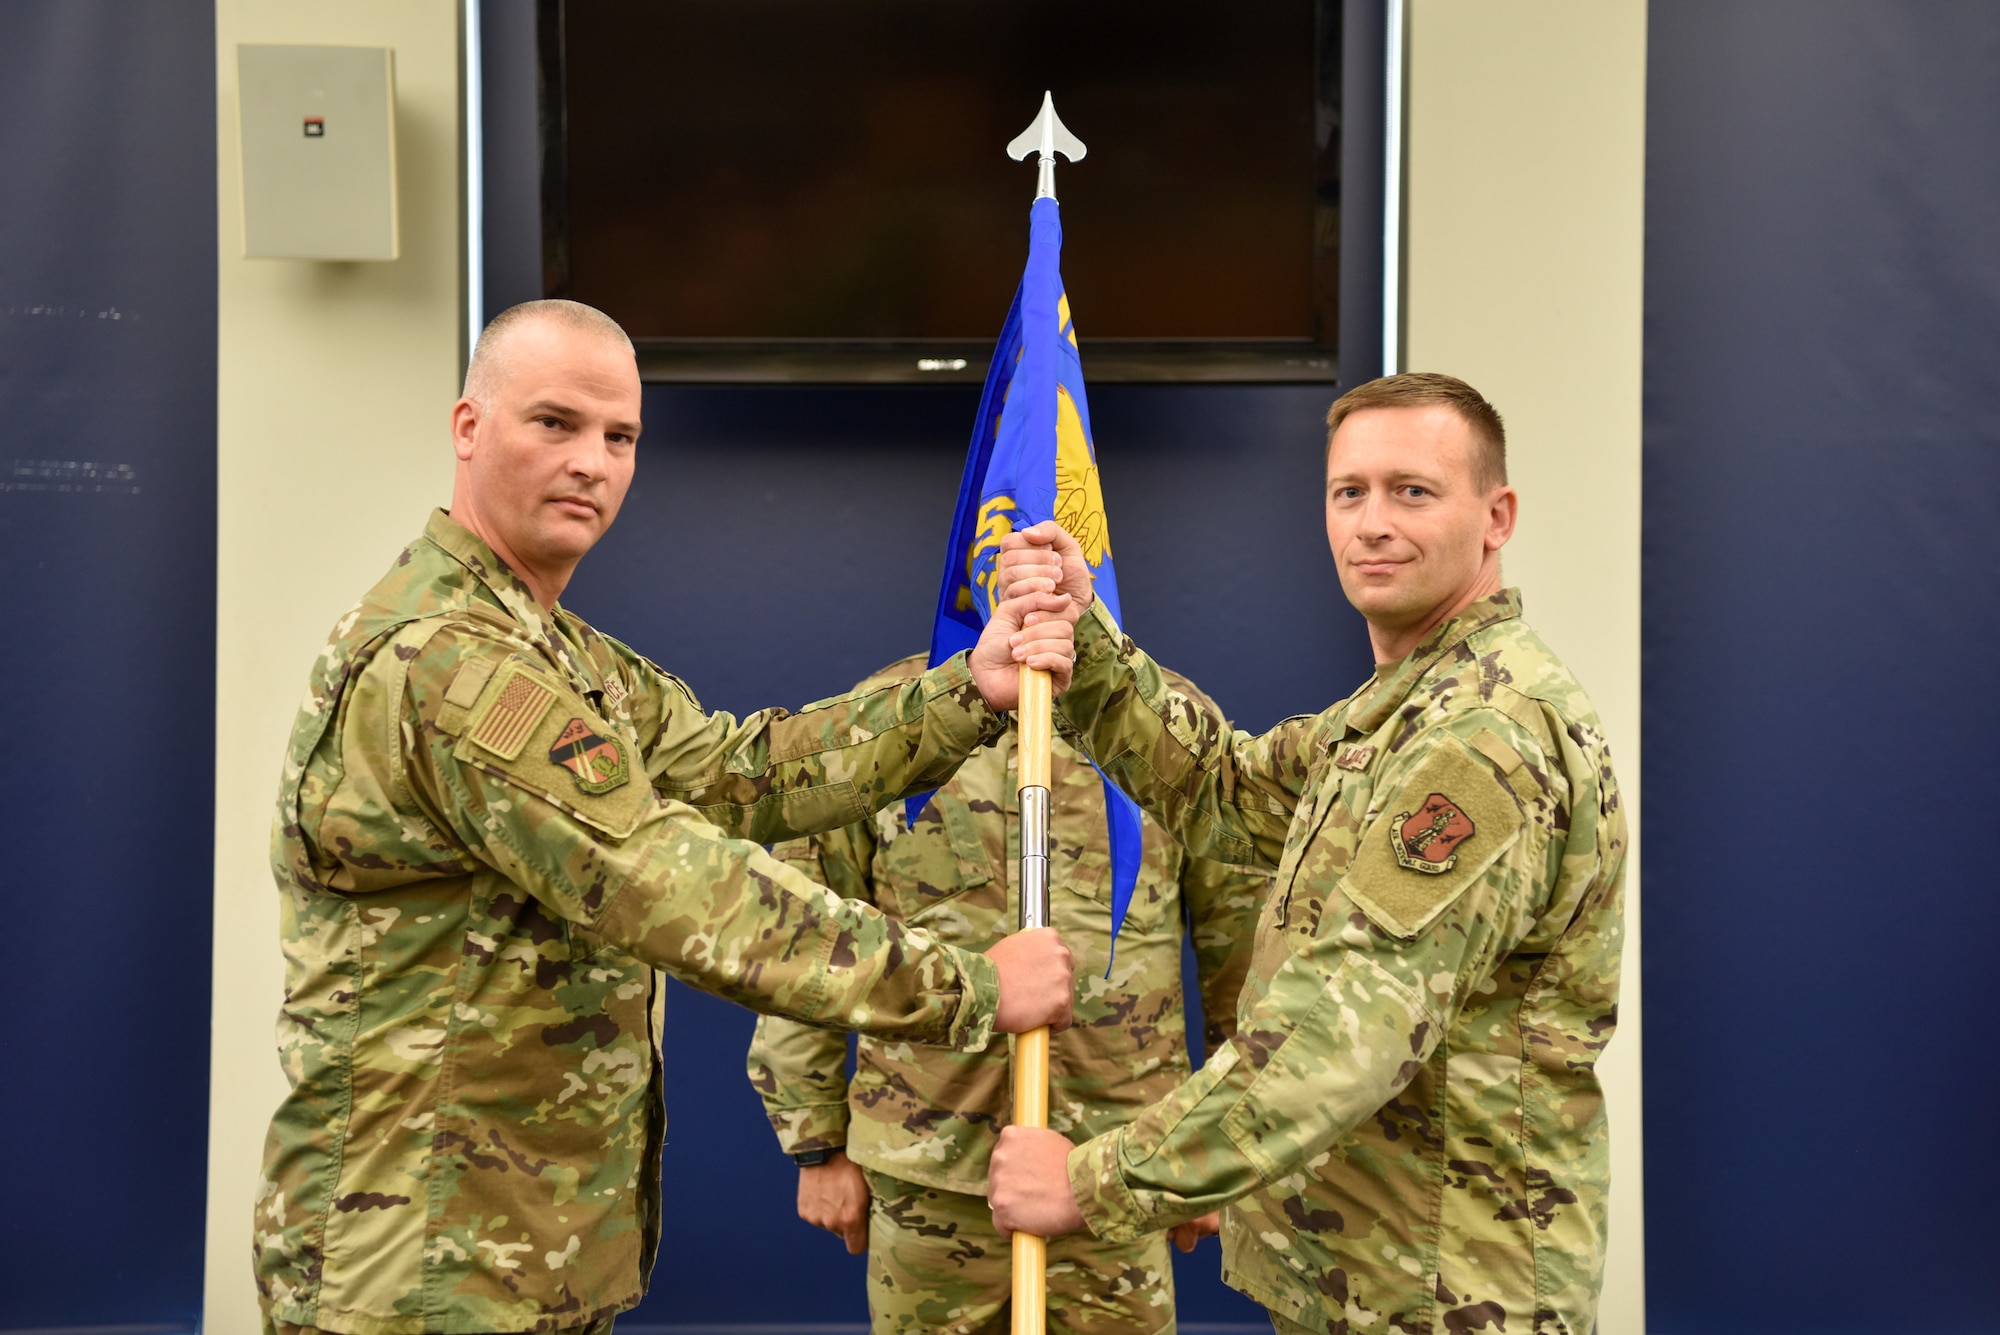 Lt Col. Aaron Gulczynski (right) receives the guidon from Col. Timothy Guy (left) during the 128th Air Refueling Wing Logistics Readiness Squadron change in command ceremony in Milwaukee, Wisconsin, Aug. 8, 2021. The Logistics Readiness Squadron provides unparalleled support to the 128 ARW refueling mission.  (U.S. Air Force photo by Senior Airman Madison Knabe)